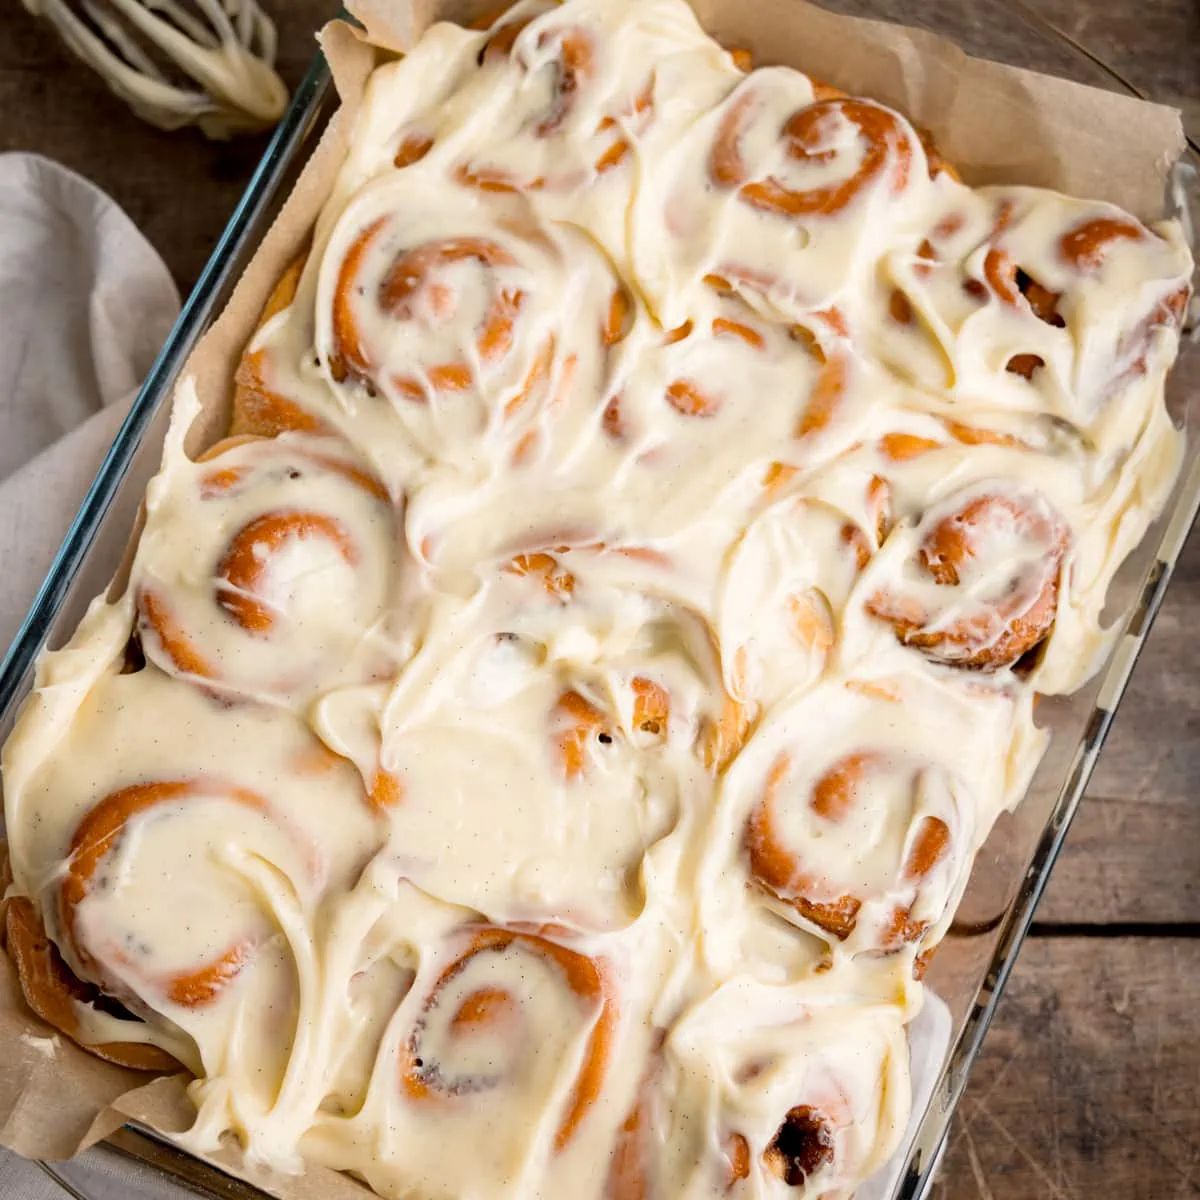 Overhead square image of 12 cinnamon rolls in a baking dish, topped with cream cheese frosting. The dish is on a wooden table, next to a beige napkin. There is a whisk with cream cheese on nearby.